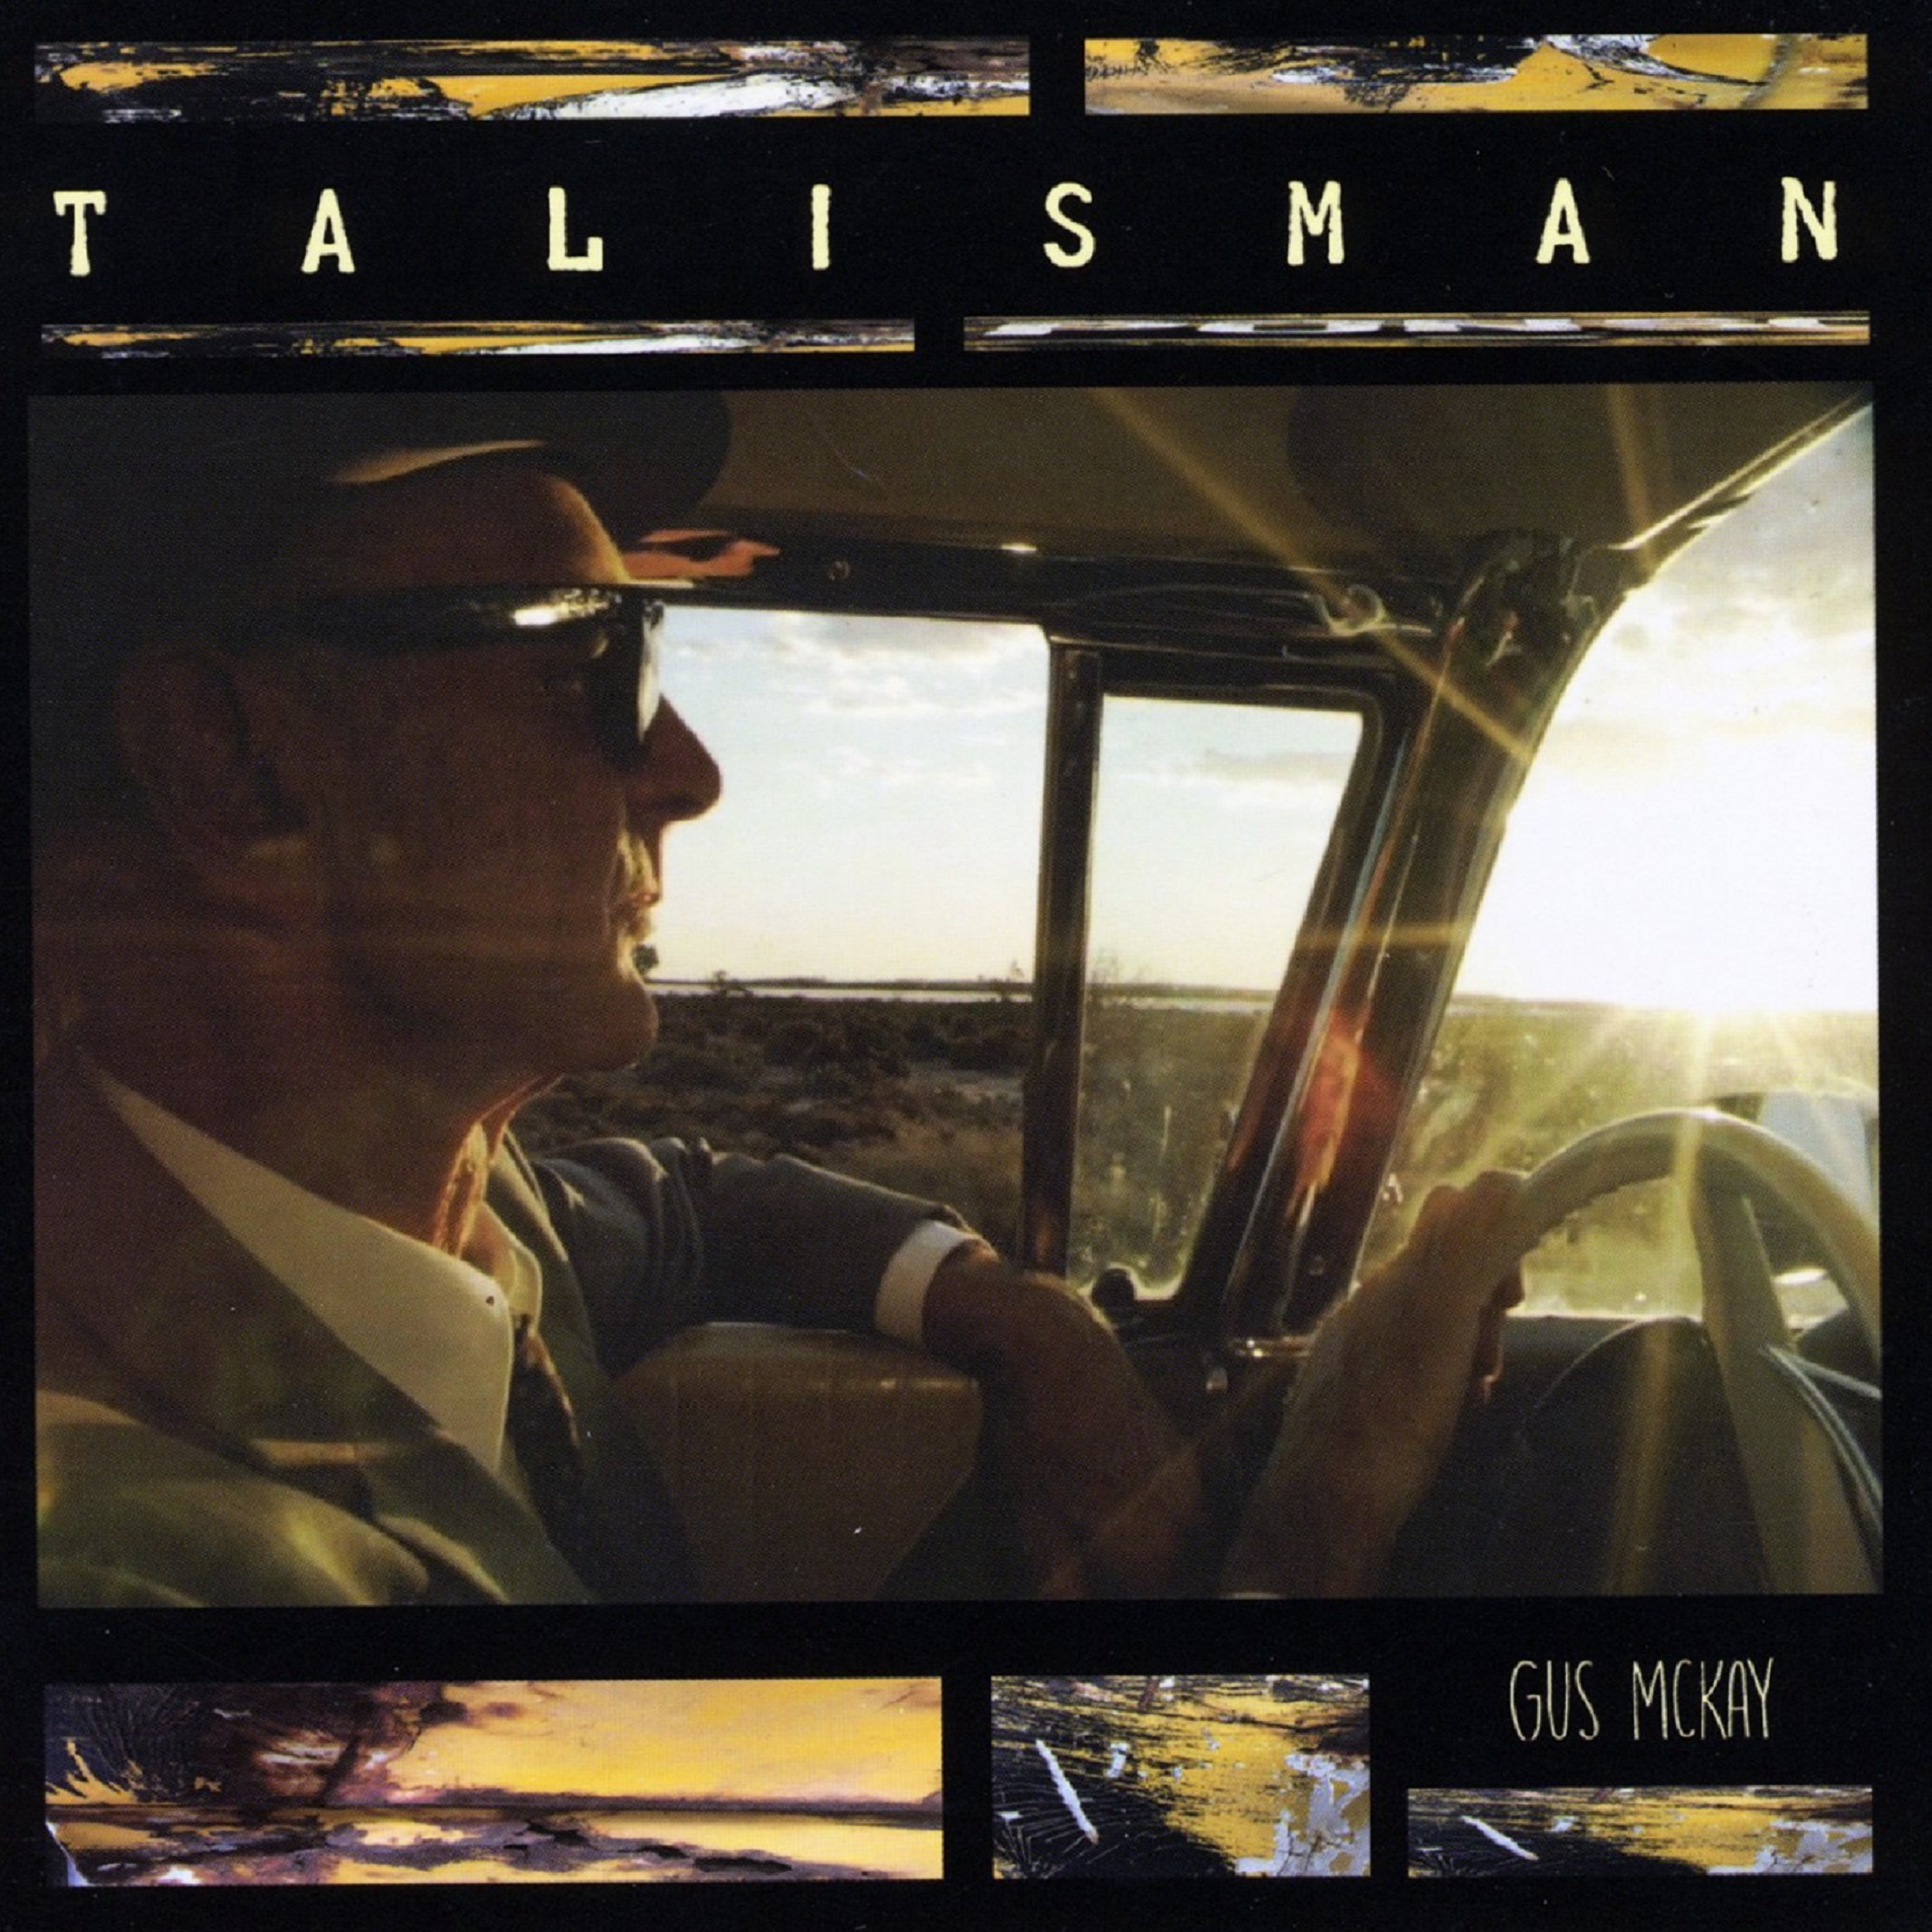 Gus McKay's 'Talisman' Available Now